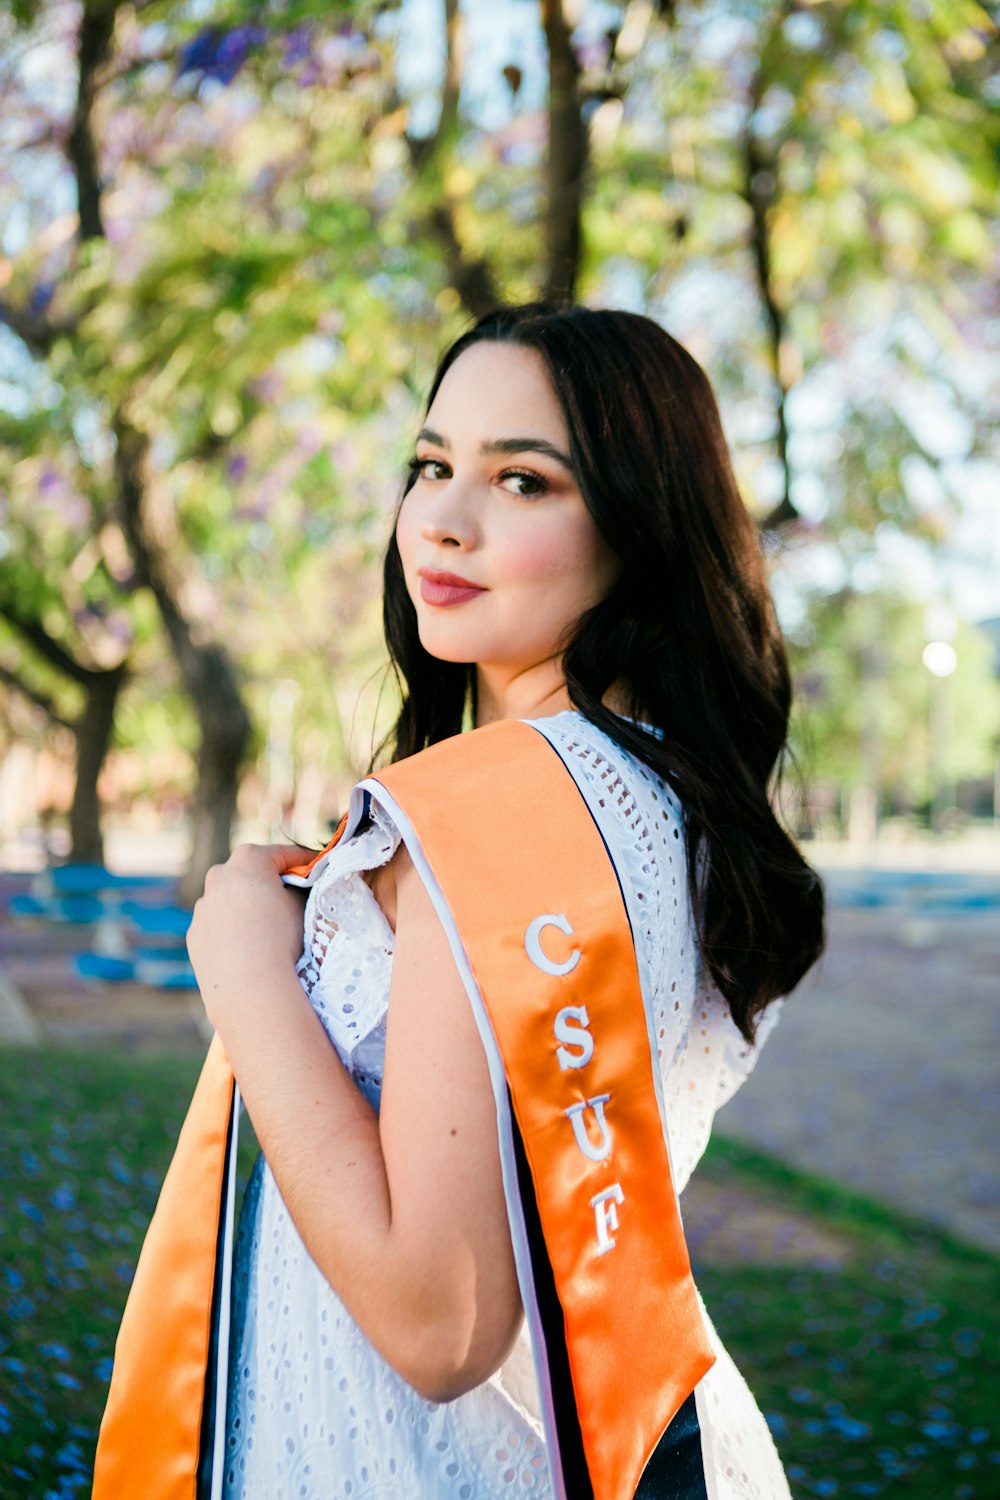 a woman in a white top and an orange sash